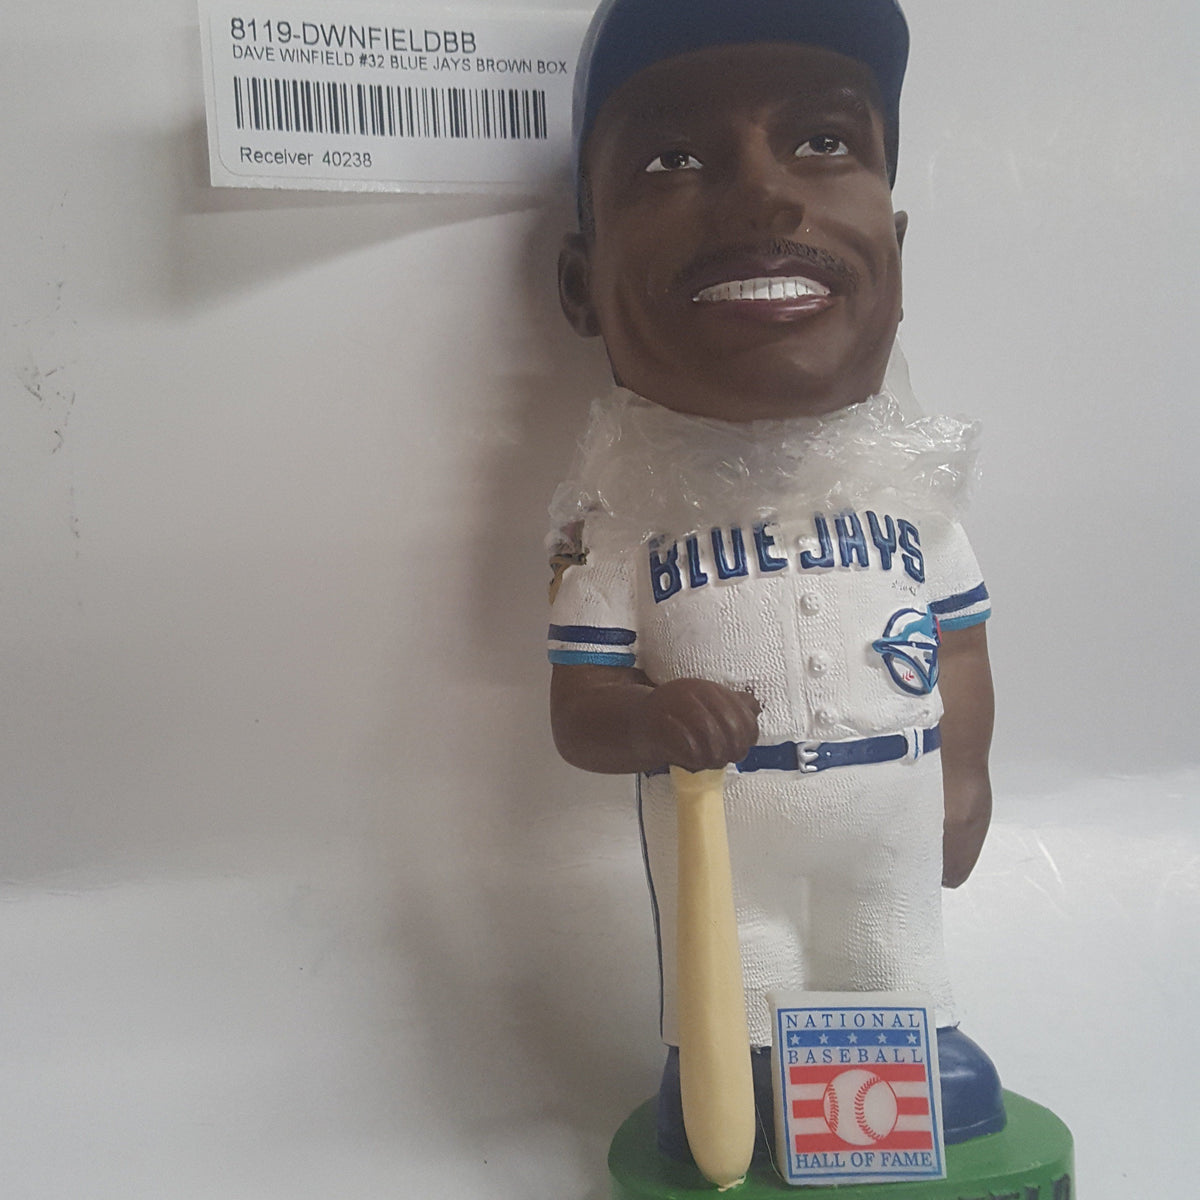 Dave Winfield Bobblehead Doll Toronto Blue Jays for Sale in